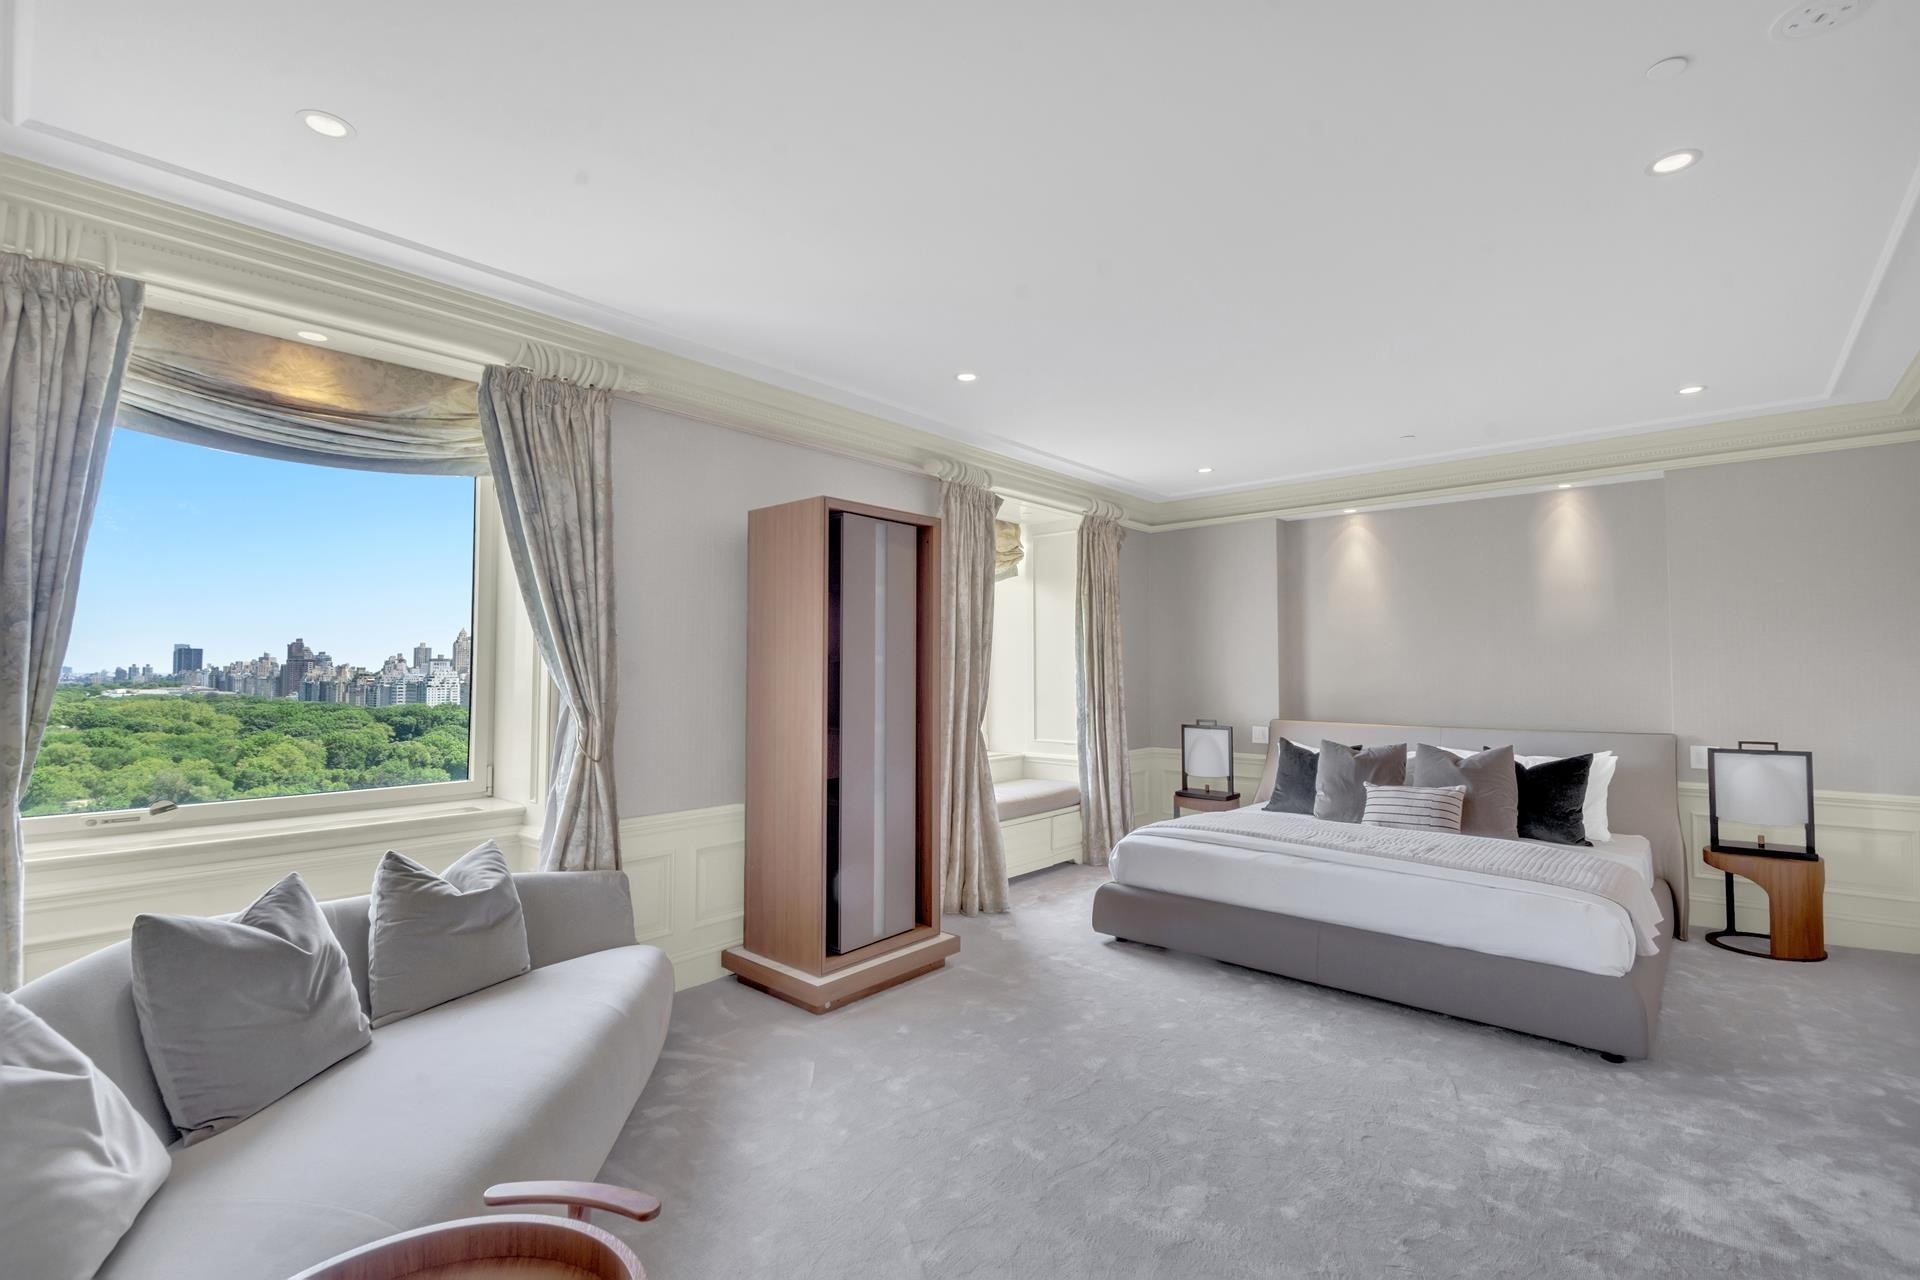 6. Condominiums for Sale at Residences At Ritz-Carlton, 50 CENTRAL PARK S, 24B Central Park South, New York, NY 10019